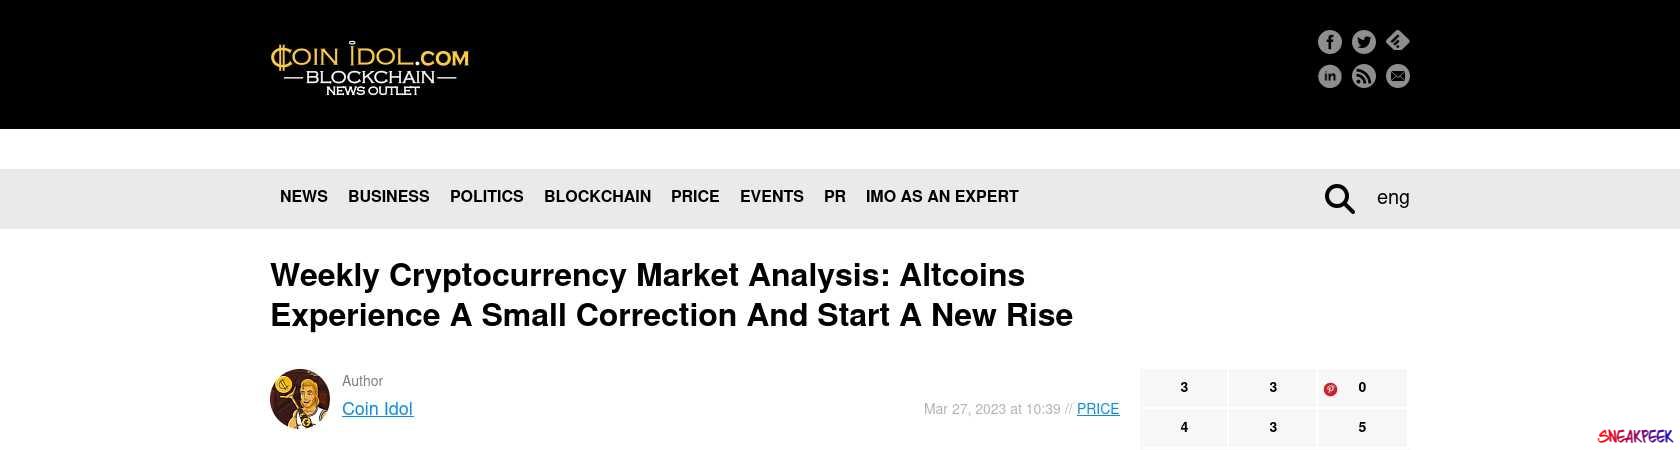 Read the full Article:  ⭲ Weekly Cryptocurrency Market Analysis: Altcoins Experience A Small Correction And Start A New Rise